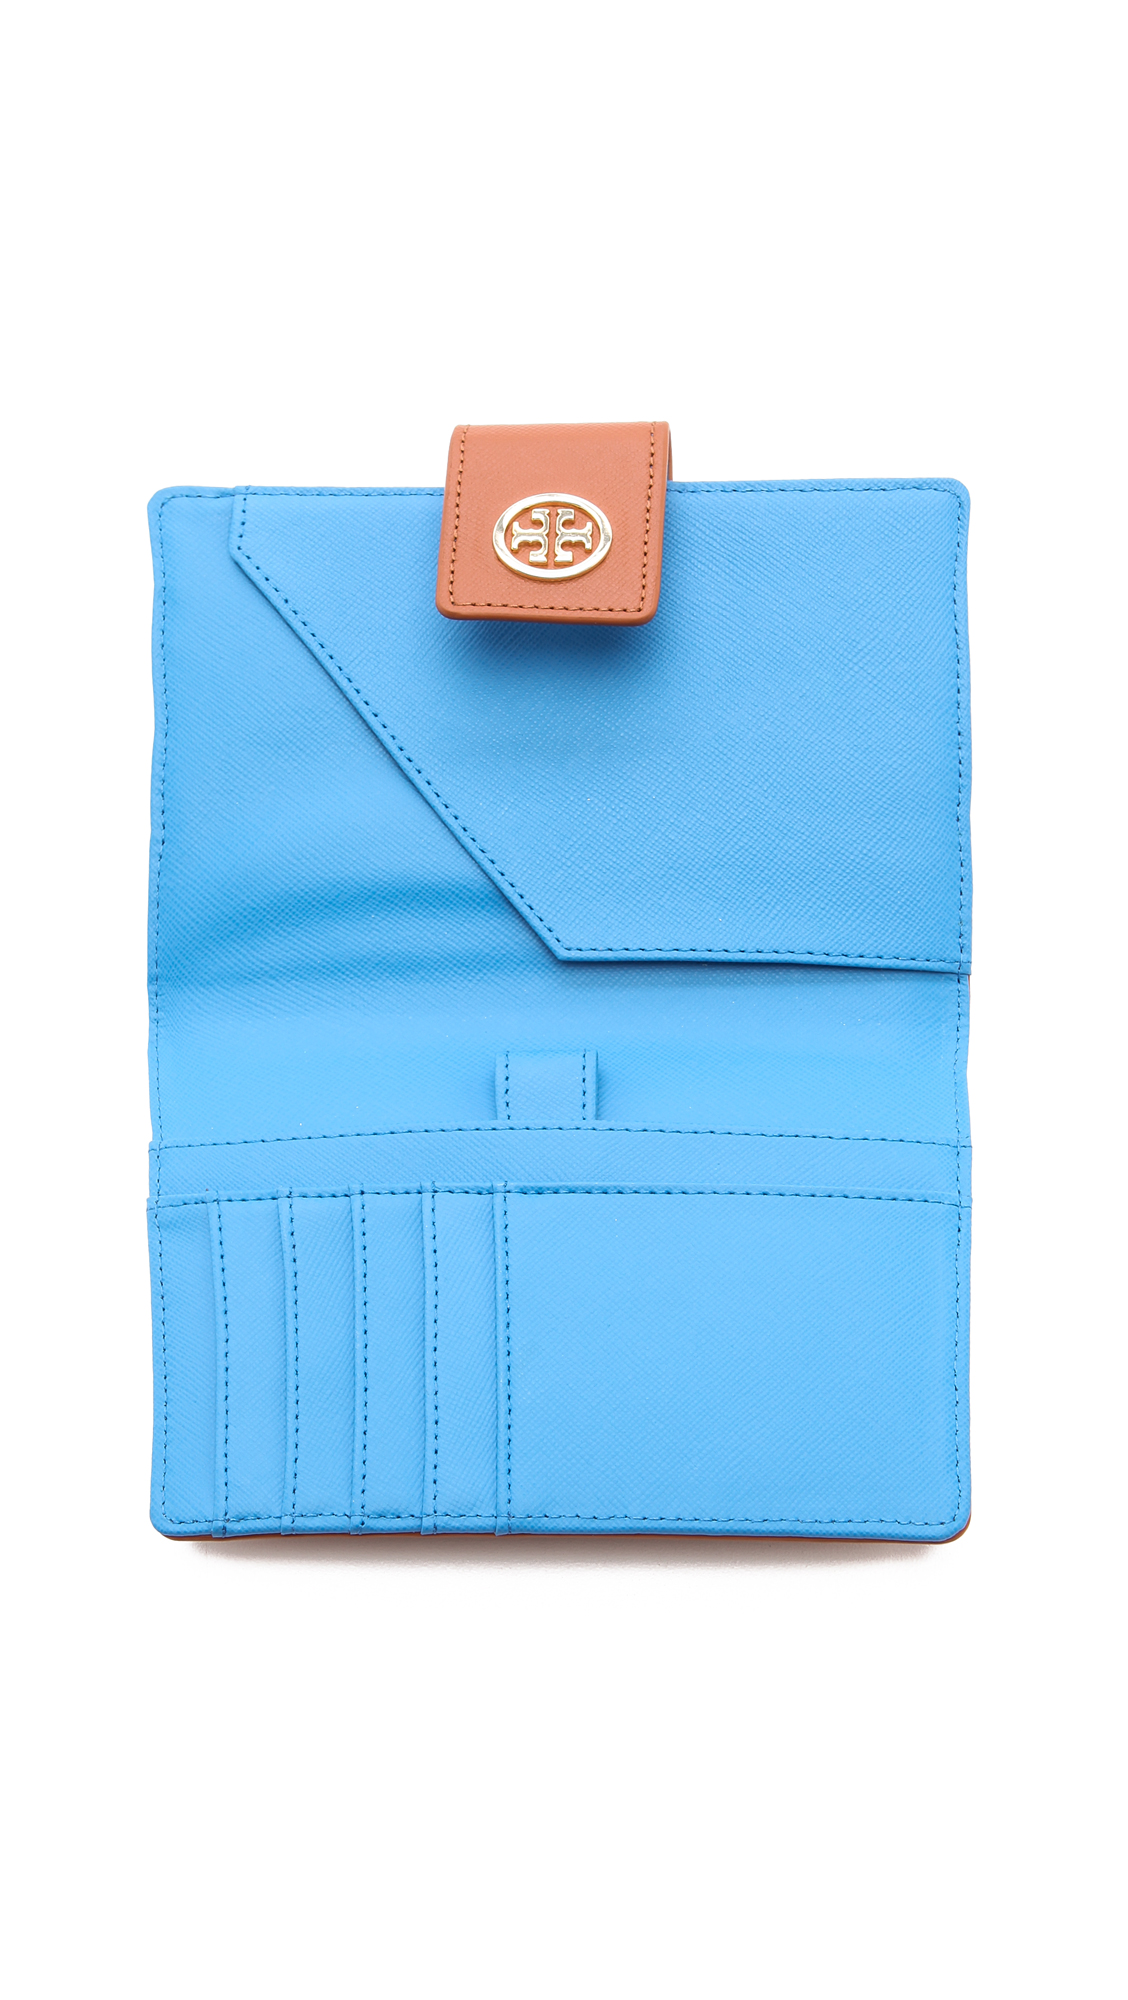 Tory Burch Robinson Large Passport Holder in Brown - Lyst